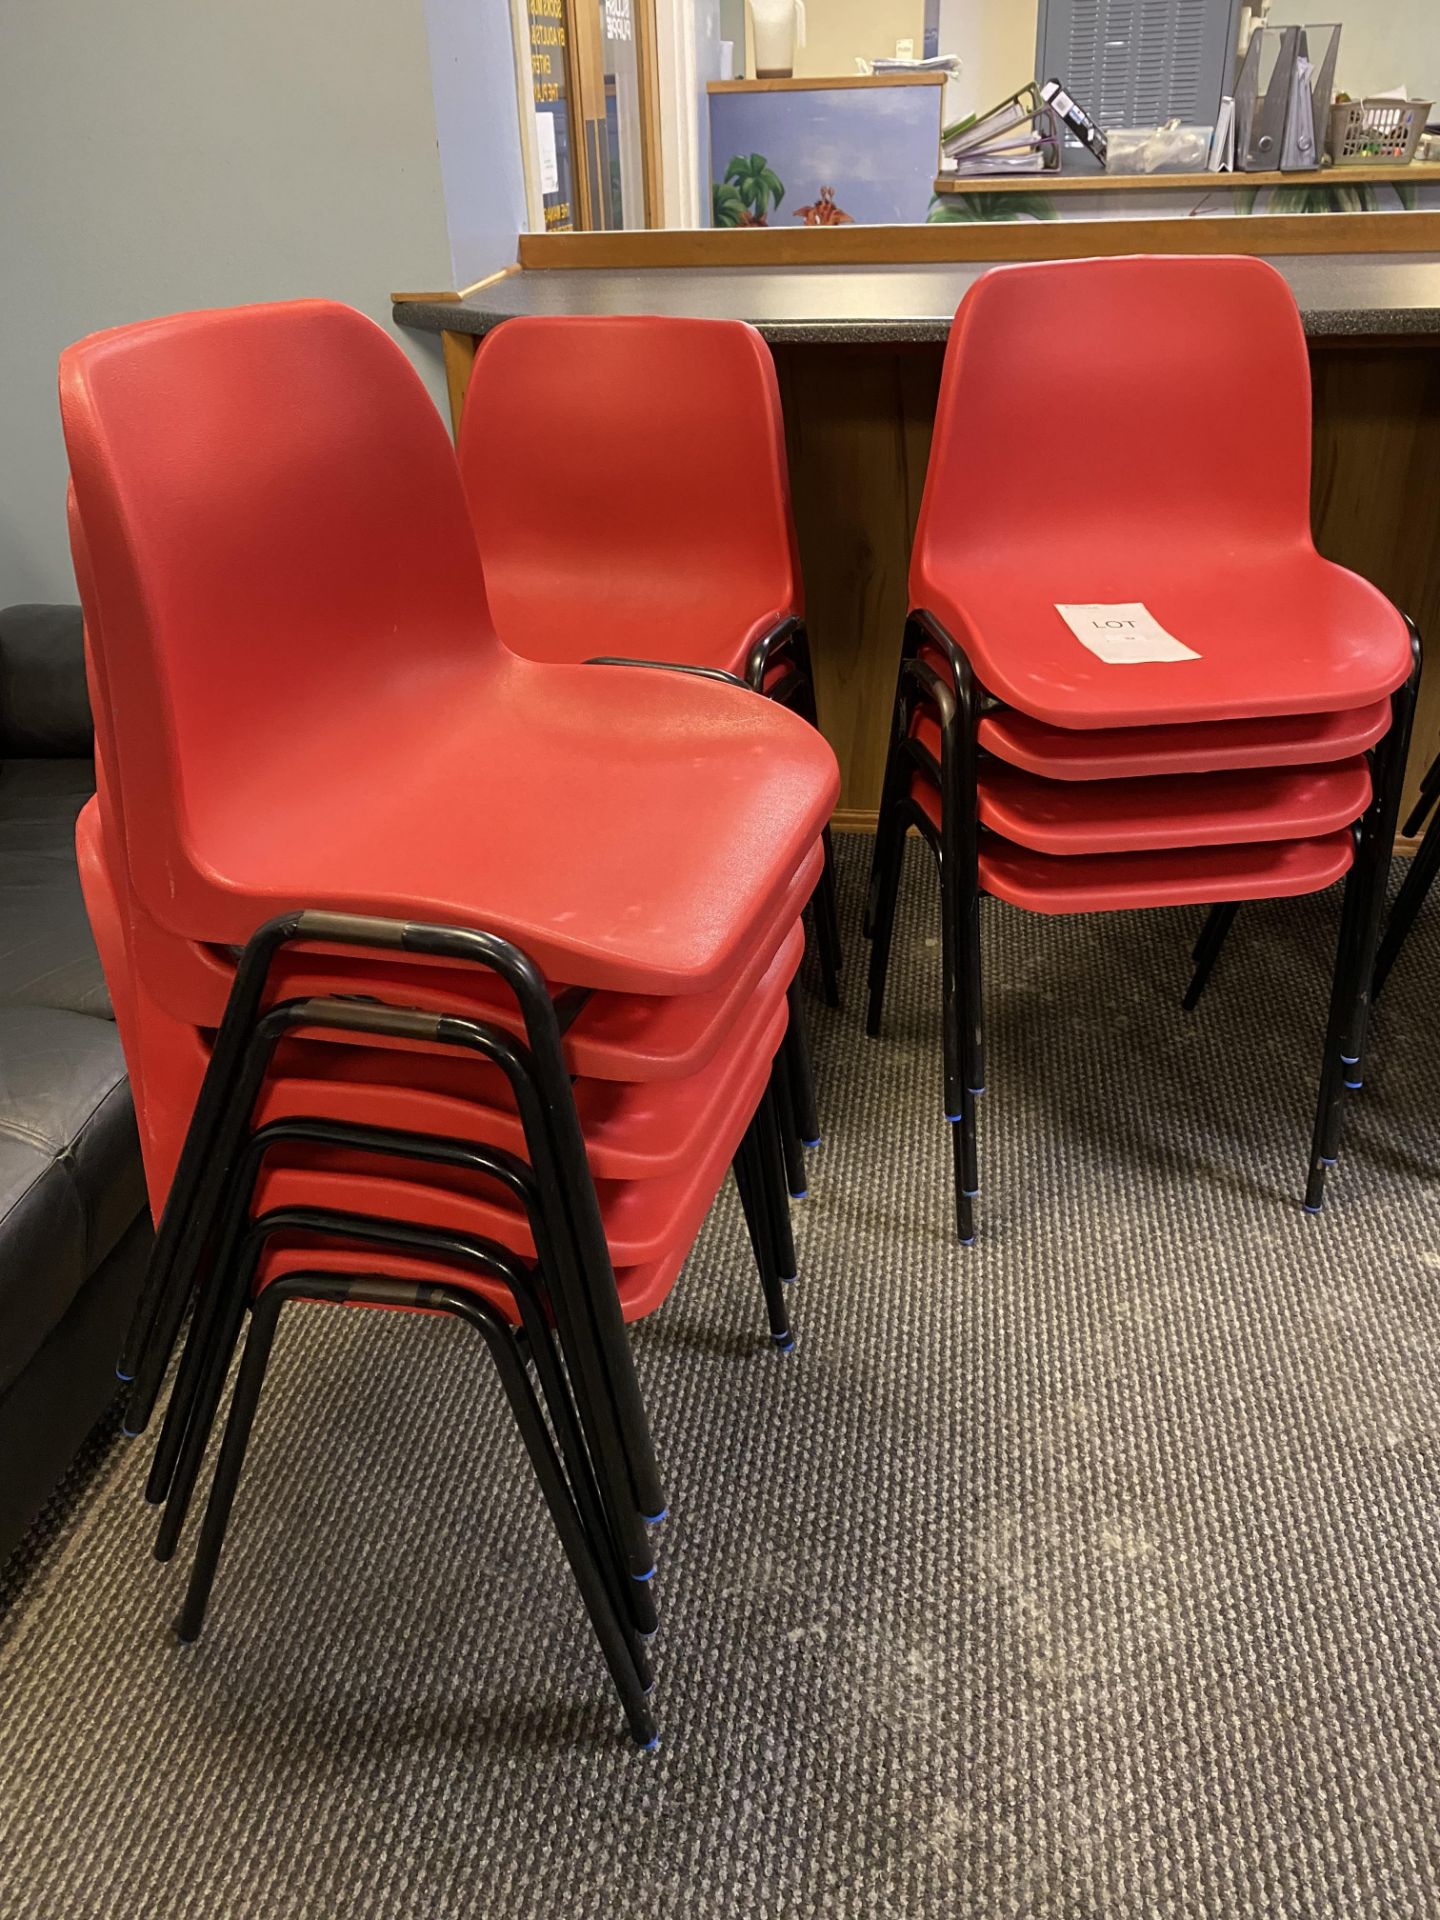 13x Red Plastic Chairs - Image 5 of 5